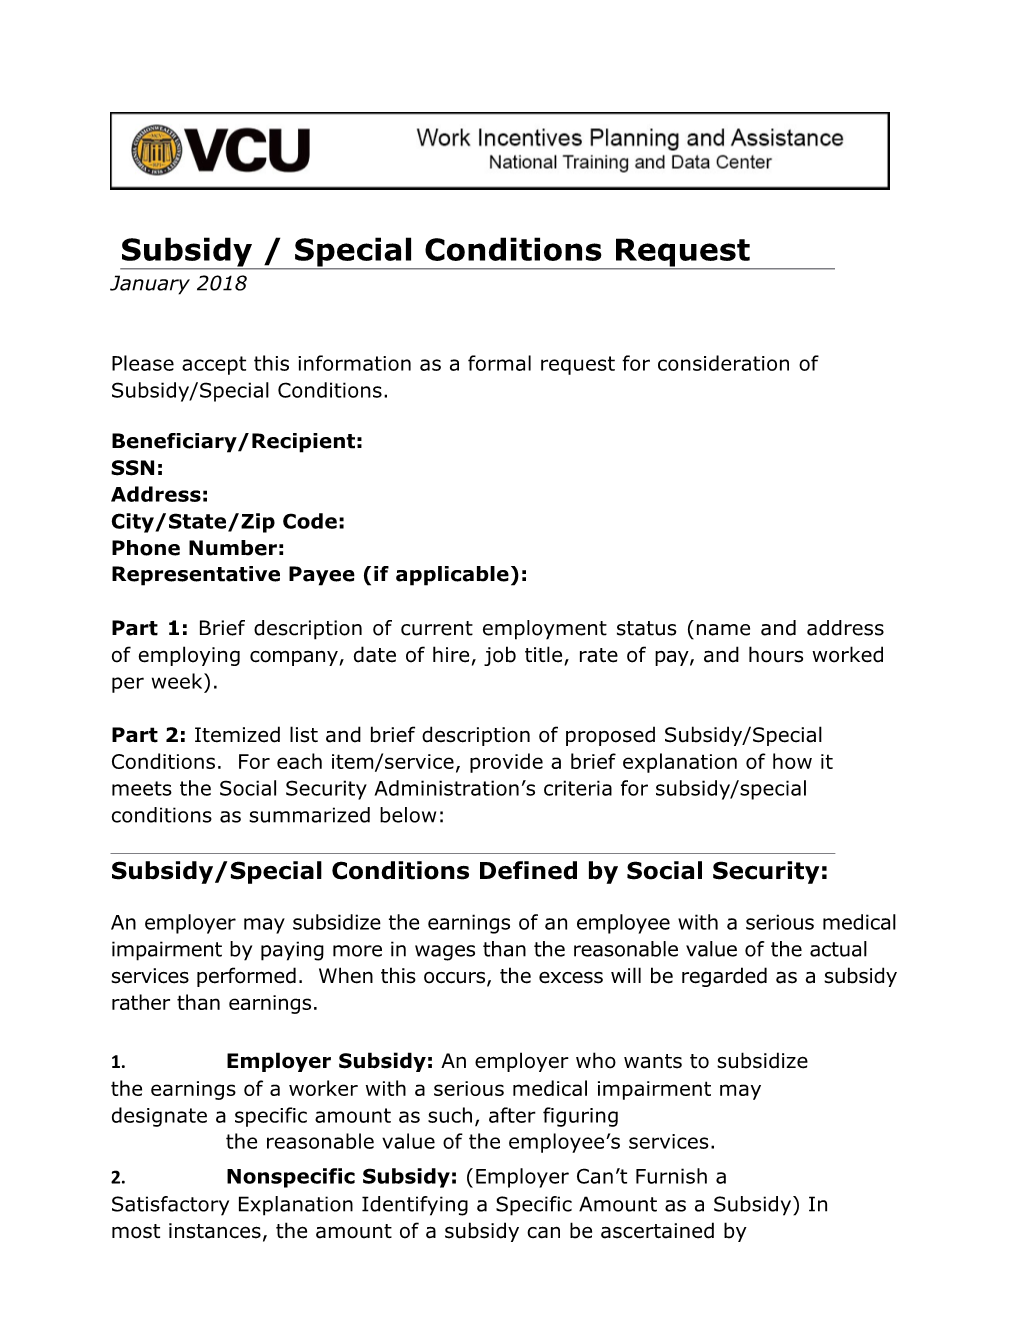 Subsidy Special Conditions Request